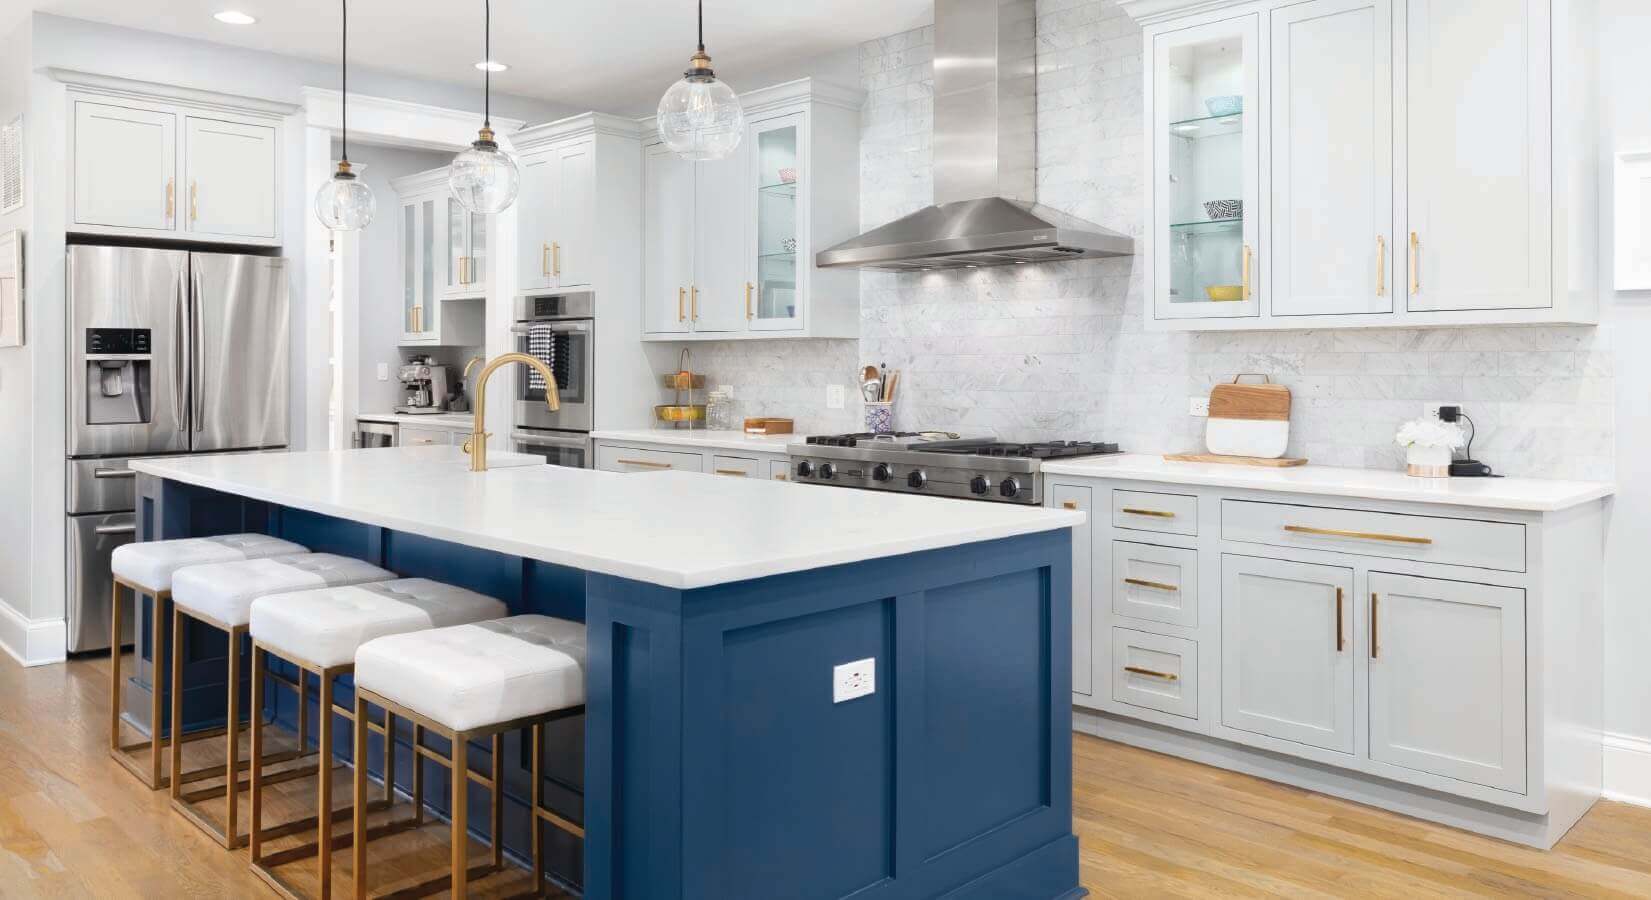 Kitchen with white cabinets and navy blue kitchen island with white countertops and gold hardware.